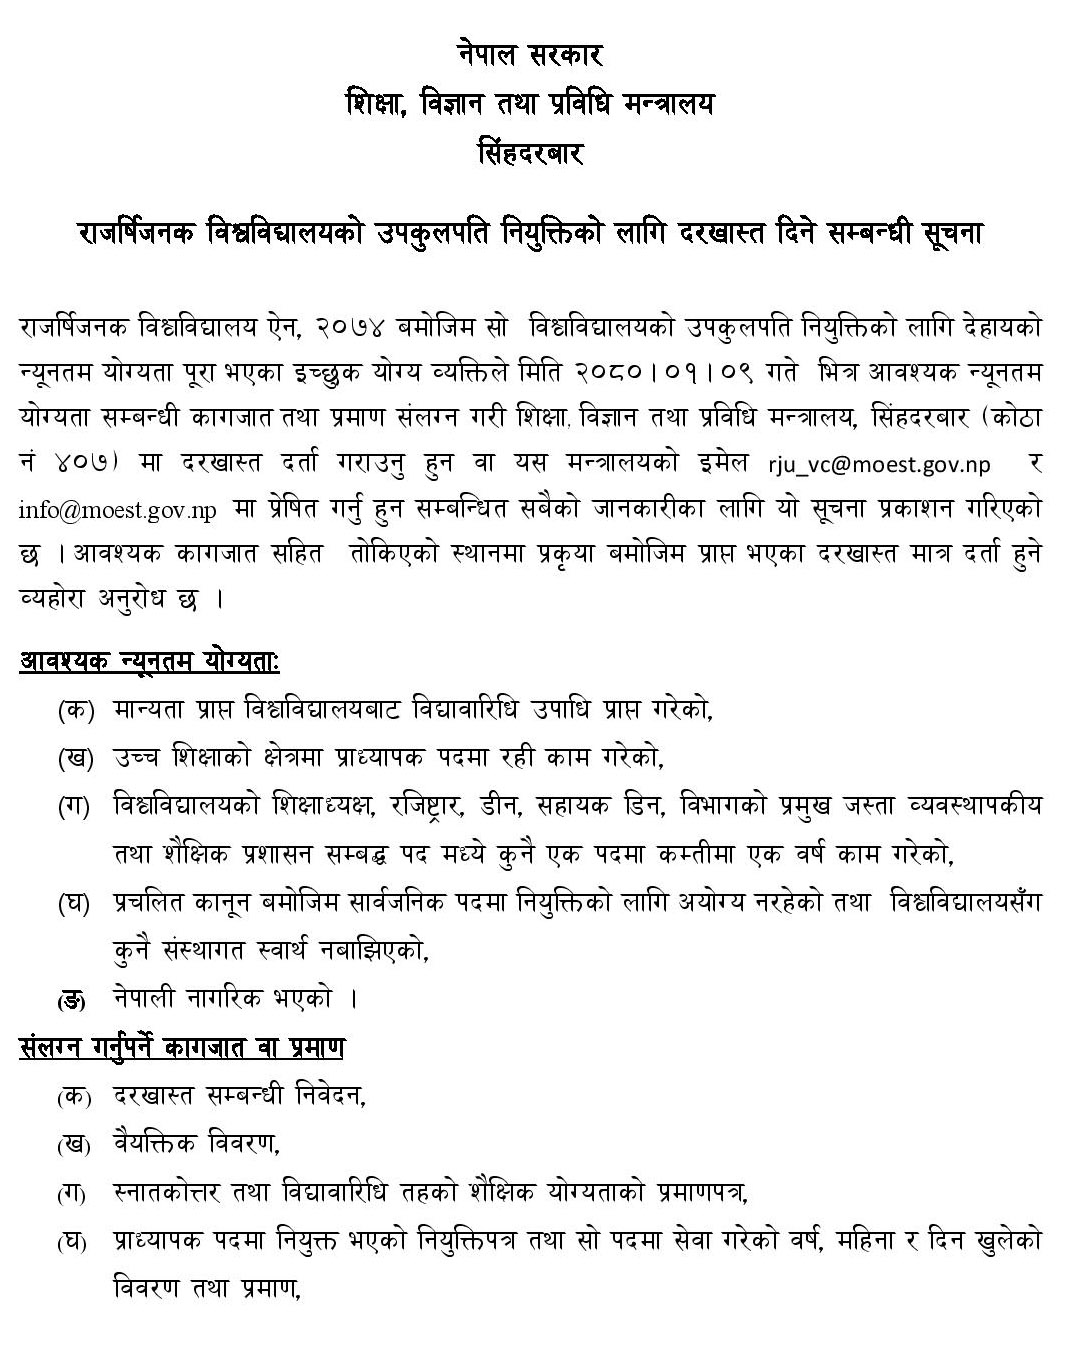 Request for Application for Vice Chancellor of Rajarshi Janak University